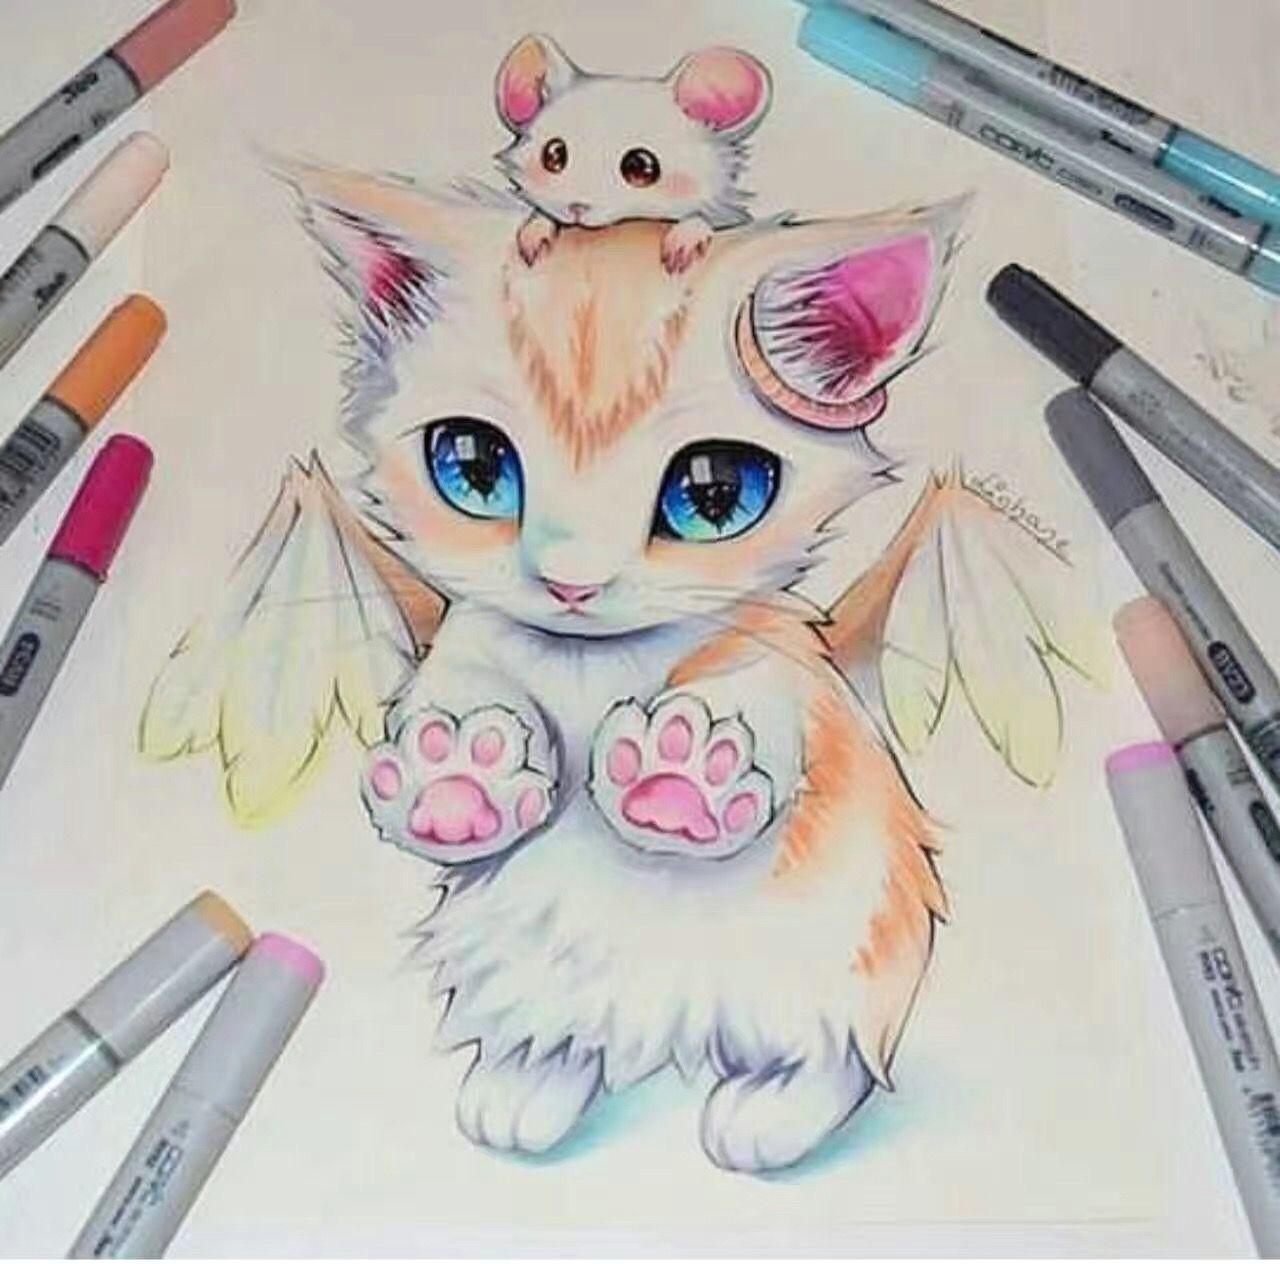 Adorable Animal Drawings A Kitten with Wings and A Mouse sooo Cute and Adorable